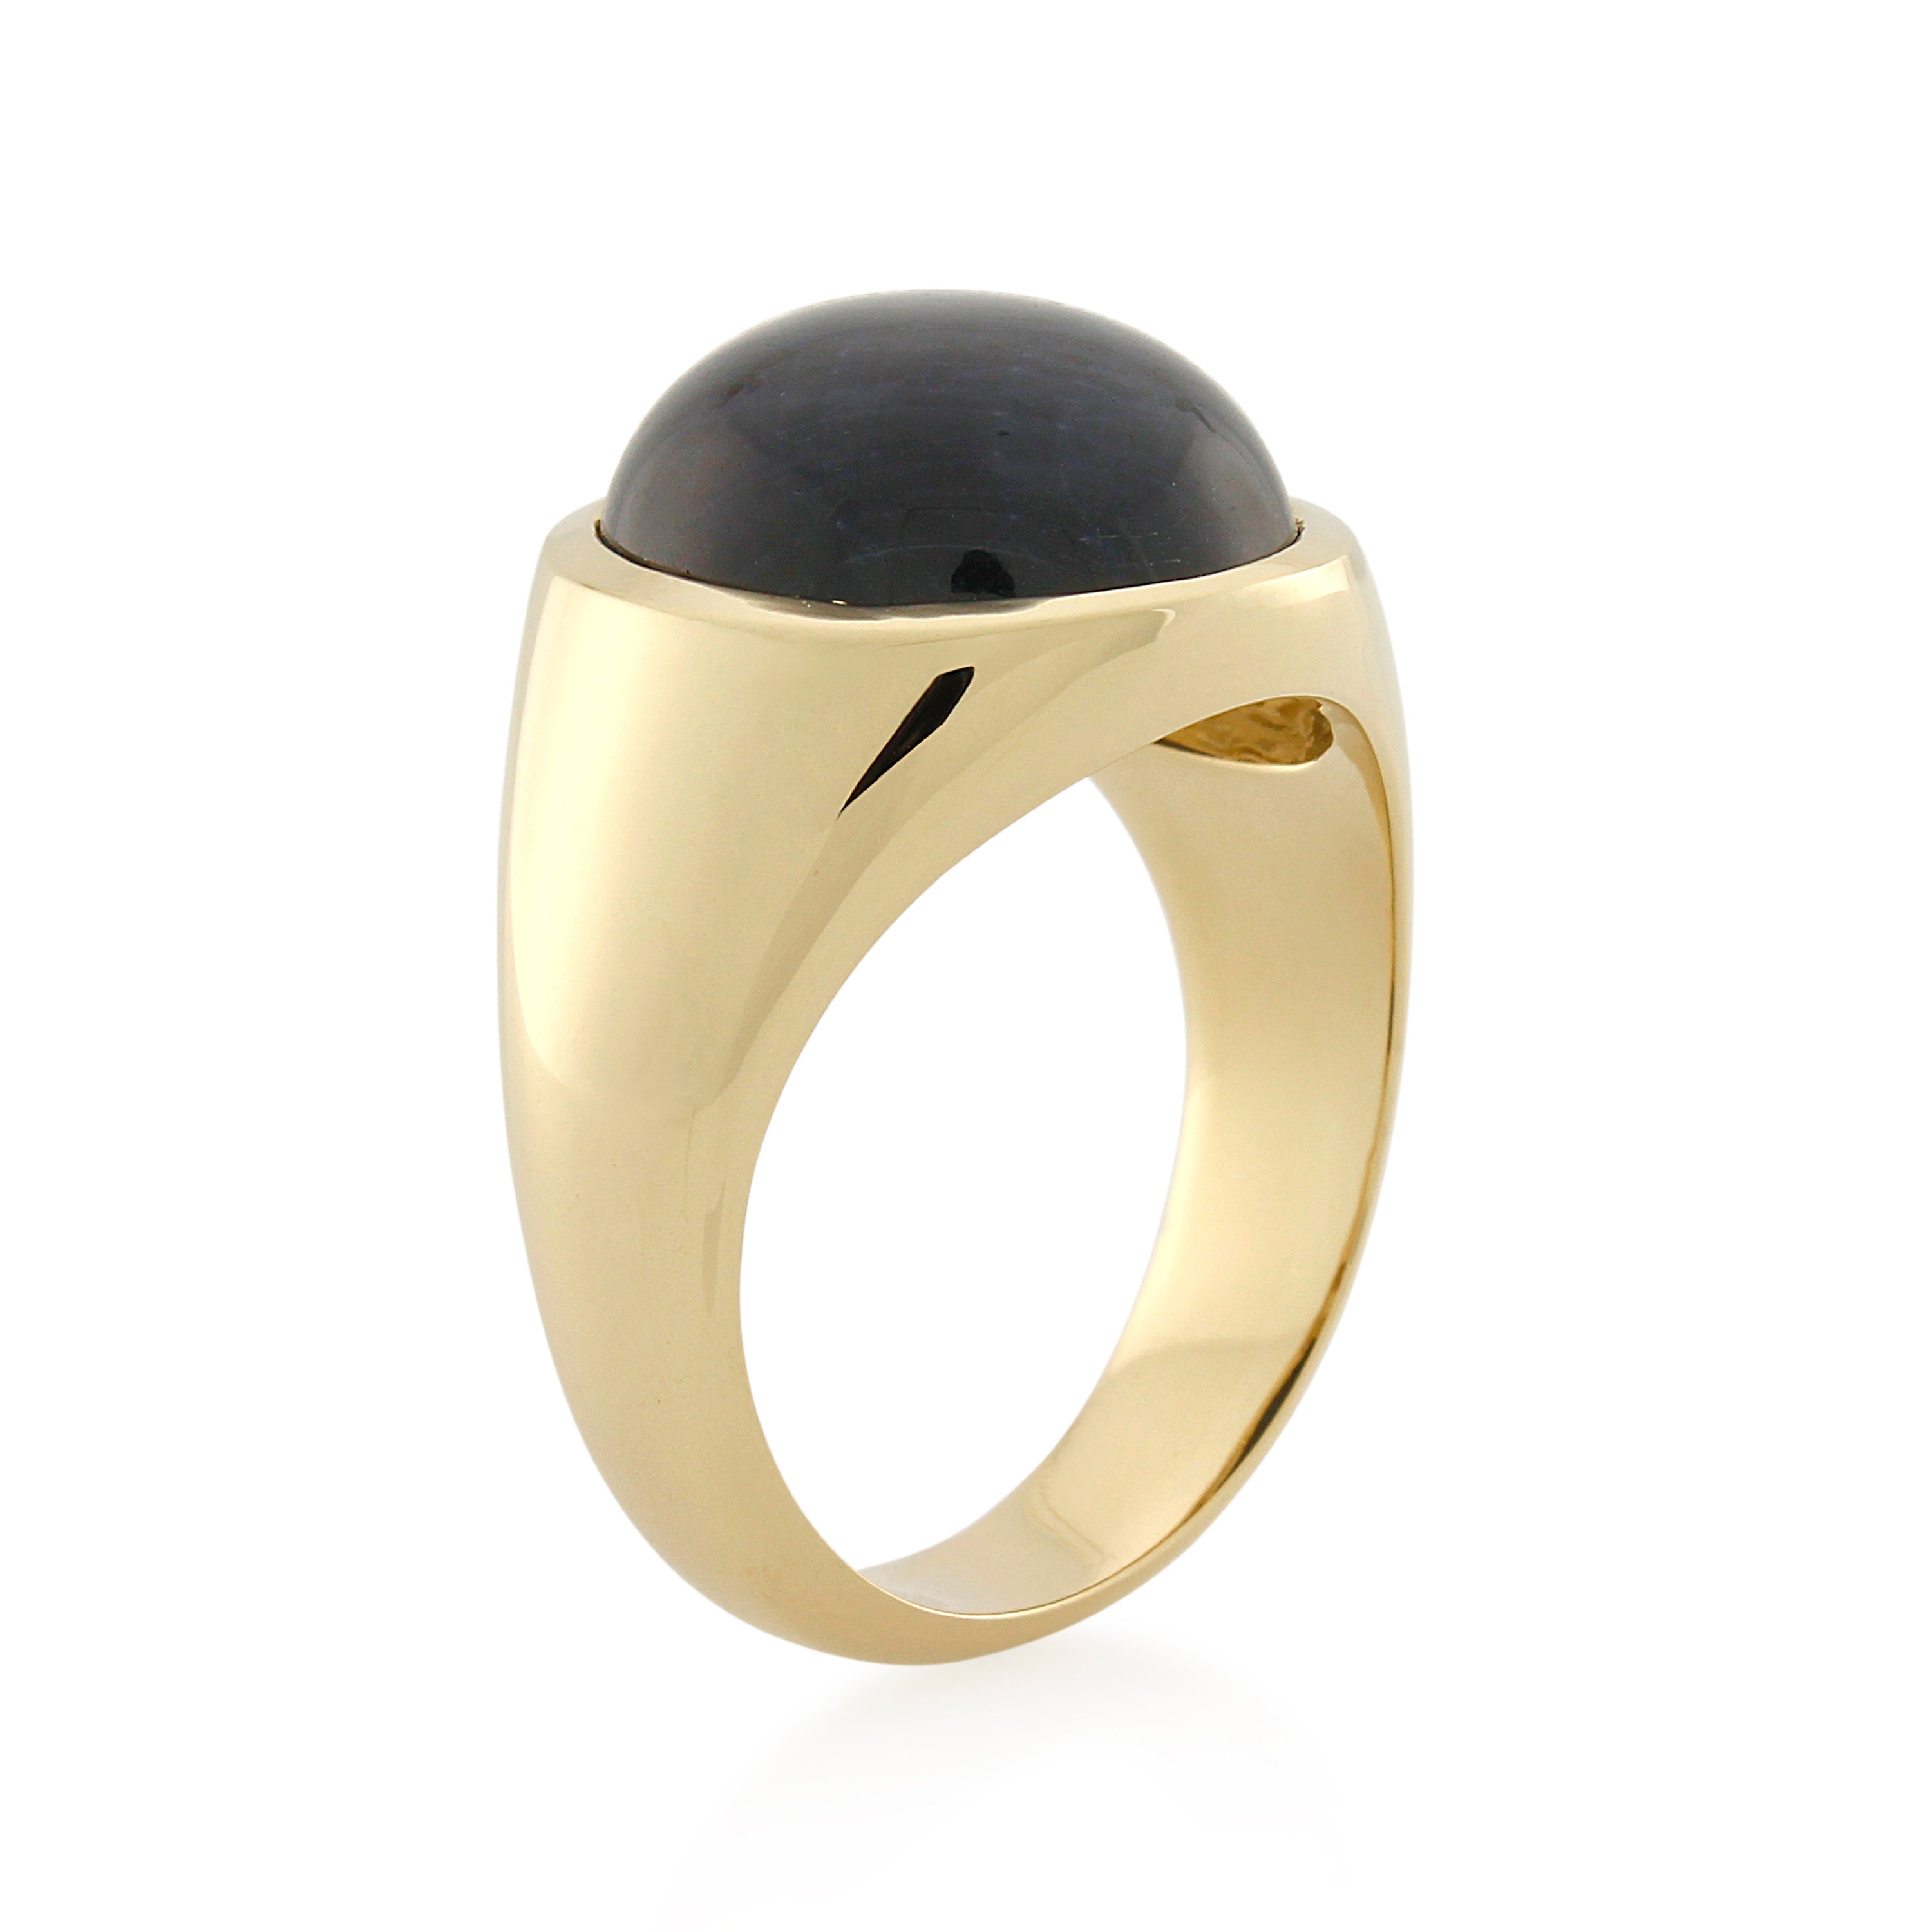 9ct Yellow Gold Black Star Sapphire Gents Ring